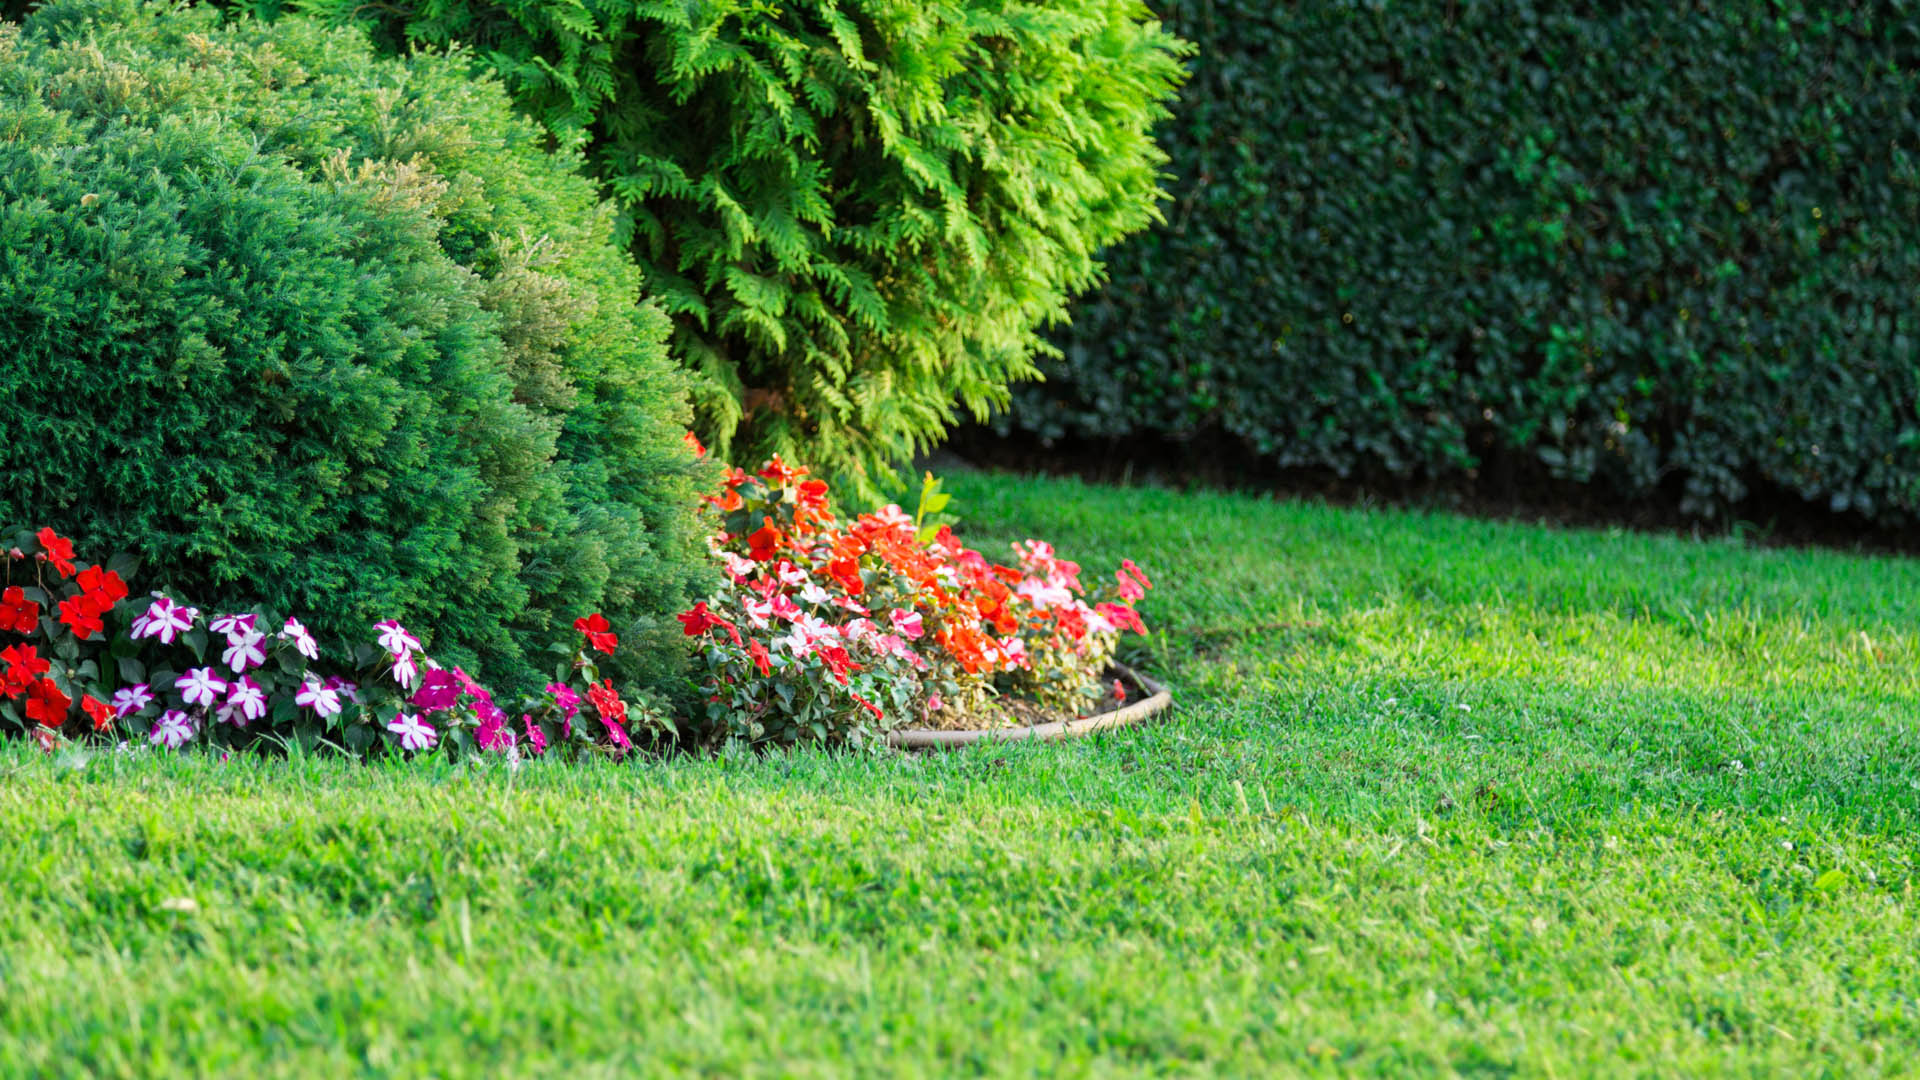 Green lawn and healthy landscaping with lawn fertilization treatment.